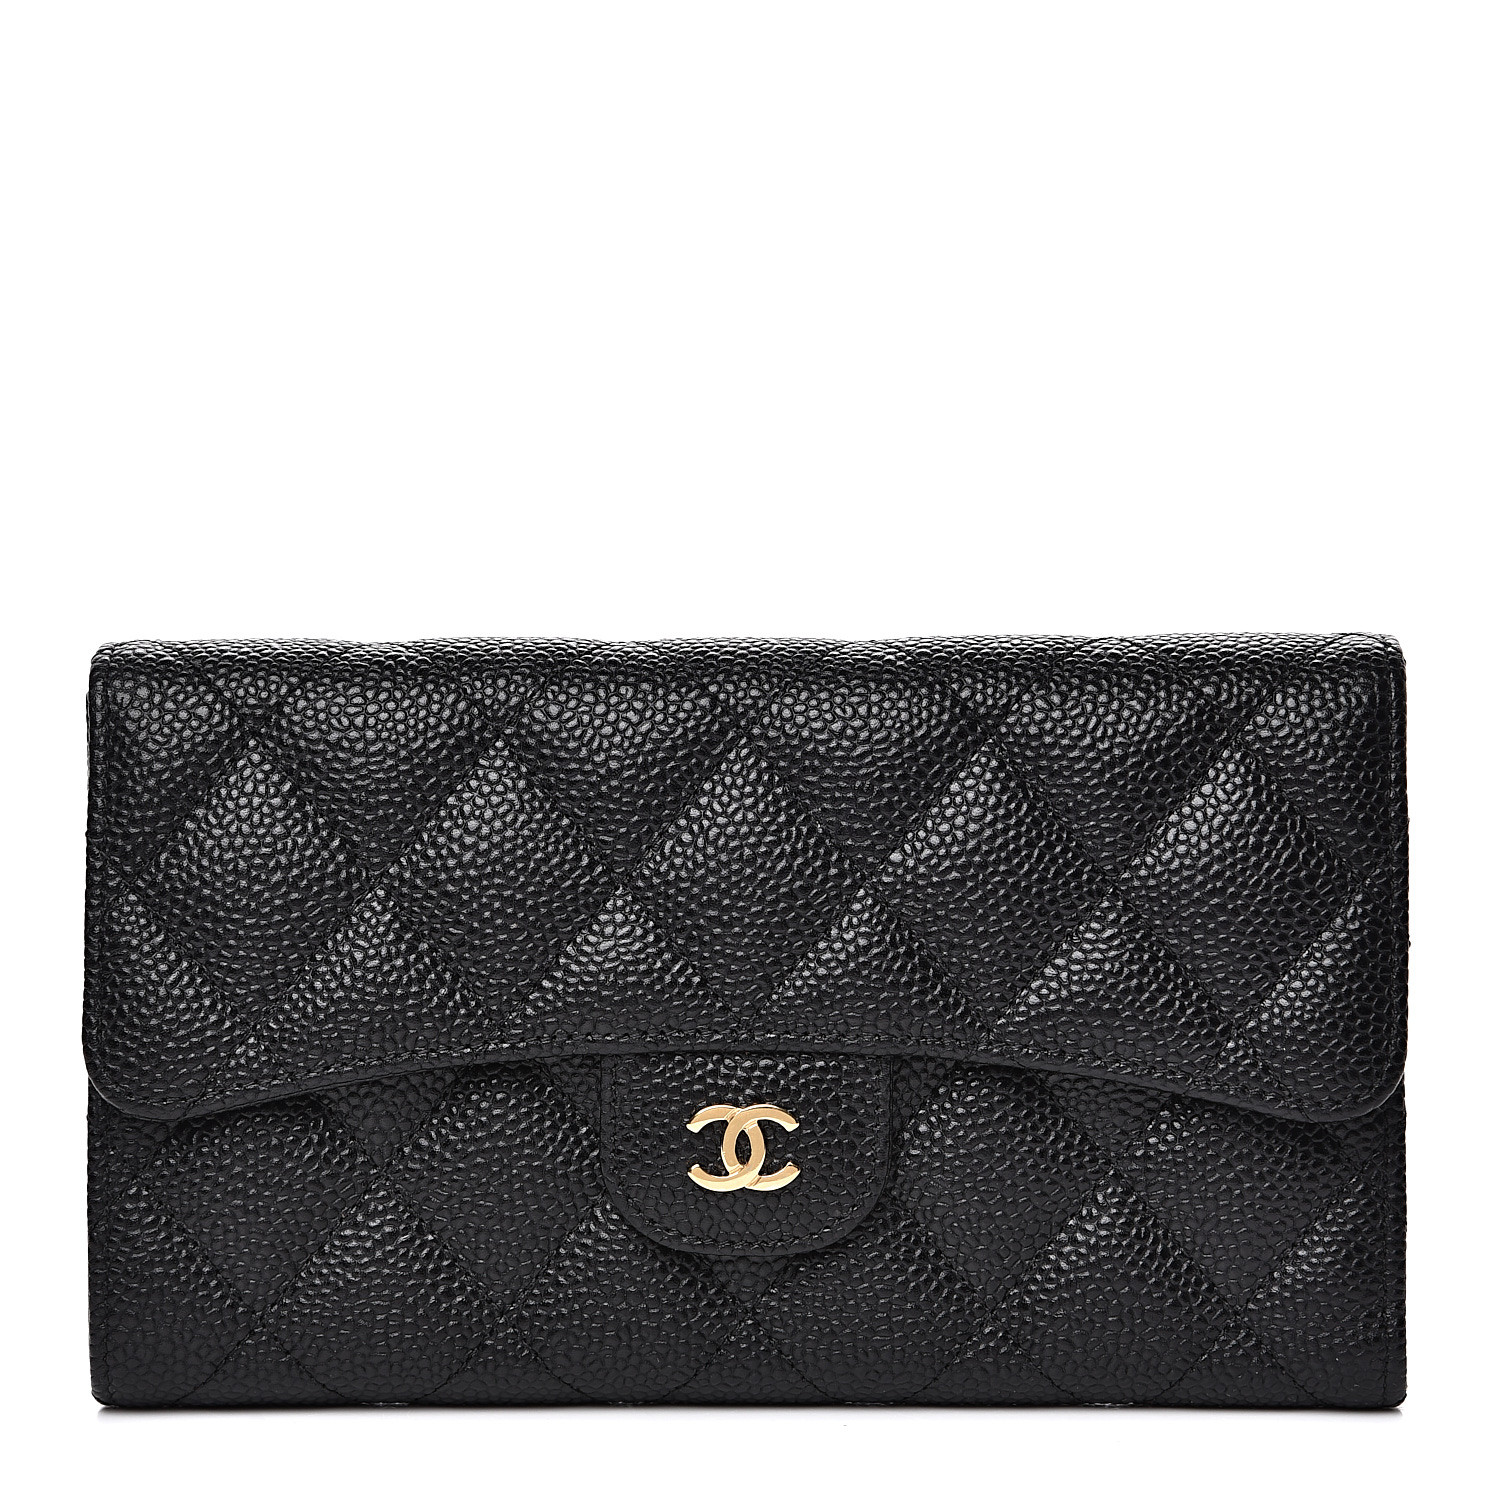 CHANEL Caviar Quilted Large Flap Wallet Black 542291